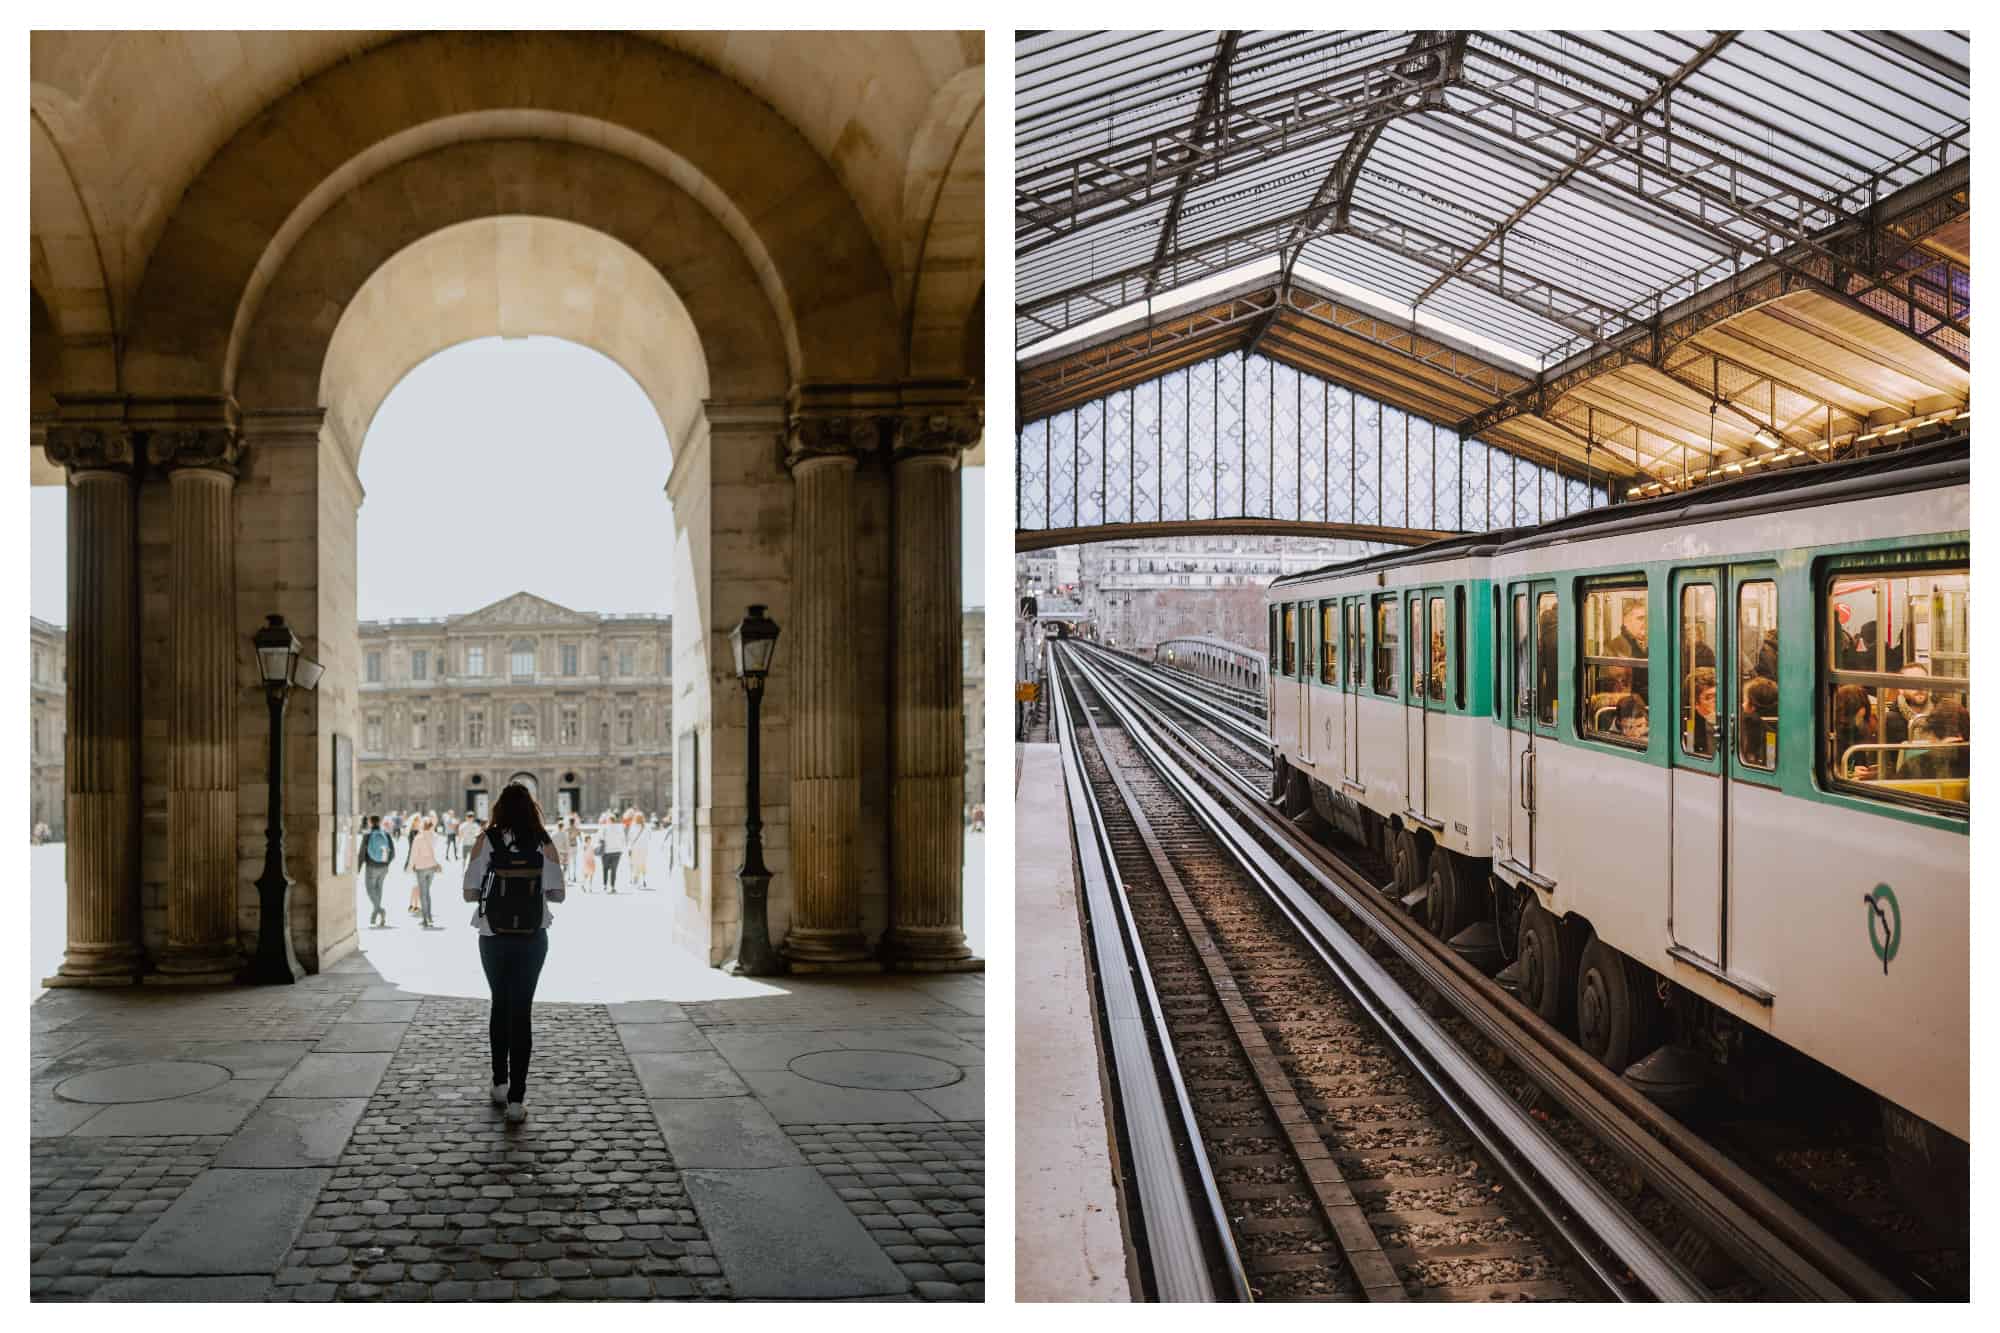 On left: A girl walks into the light-flooded back courtyard of the Louvre, framed by the majestic archway and classic Paris street lamps. On right: Metro line six passes through a station. In tram mode, it rides above ground on a bridge, giving riders a beautiful view of Paris. 